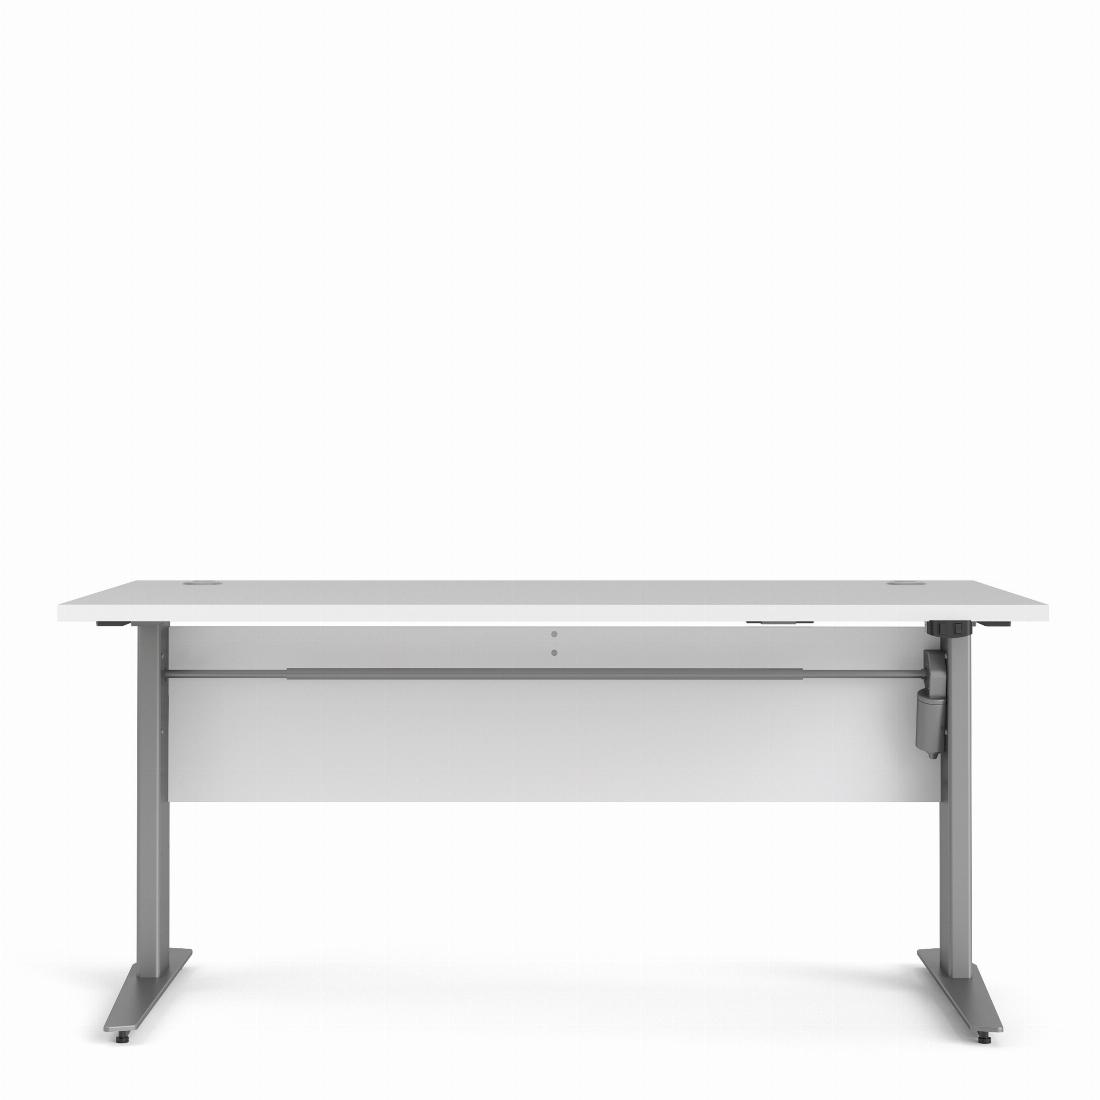 Prima Desk 150 cm in White with Height adjustable legs with electric control in Silver grey steel